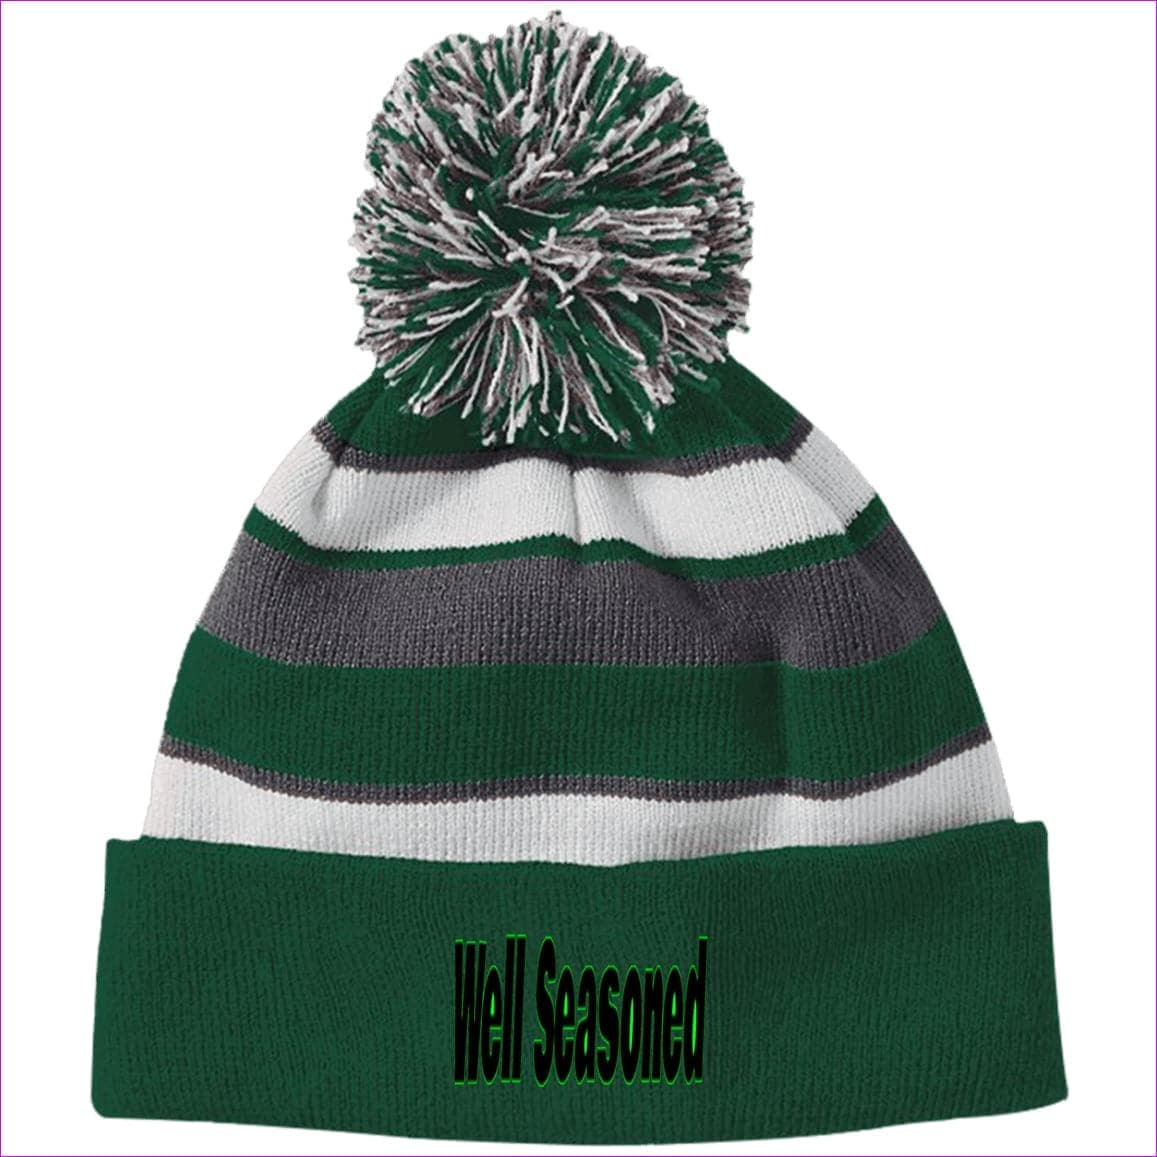 Forest/White One Size Well Seasoned Embroidered Holloway Striped Beanie with Pom - Hats at TFC&H Co.